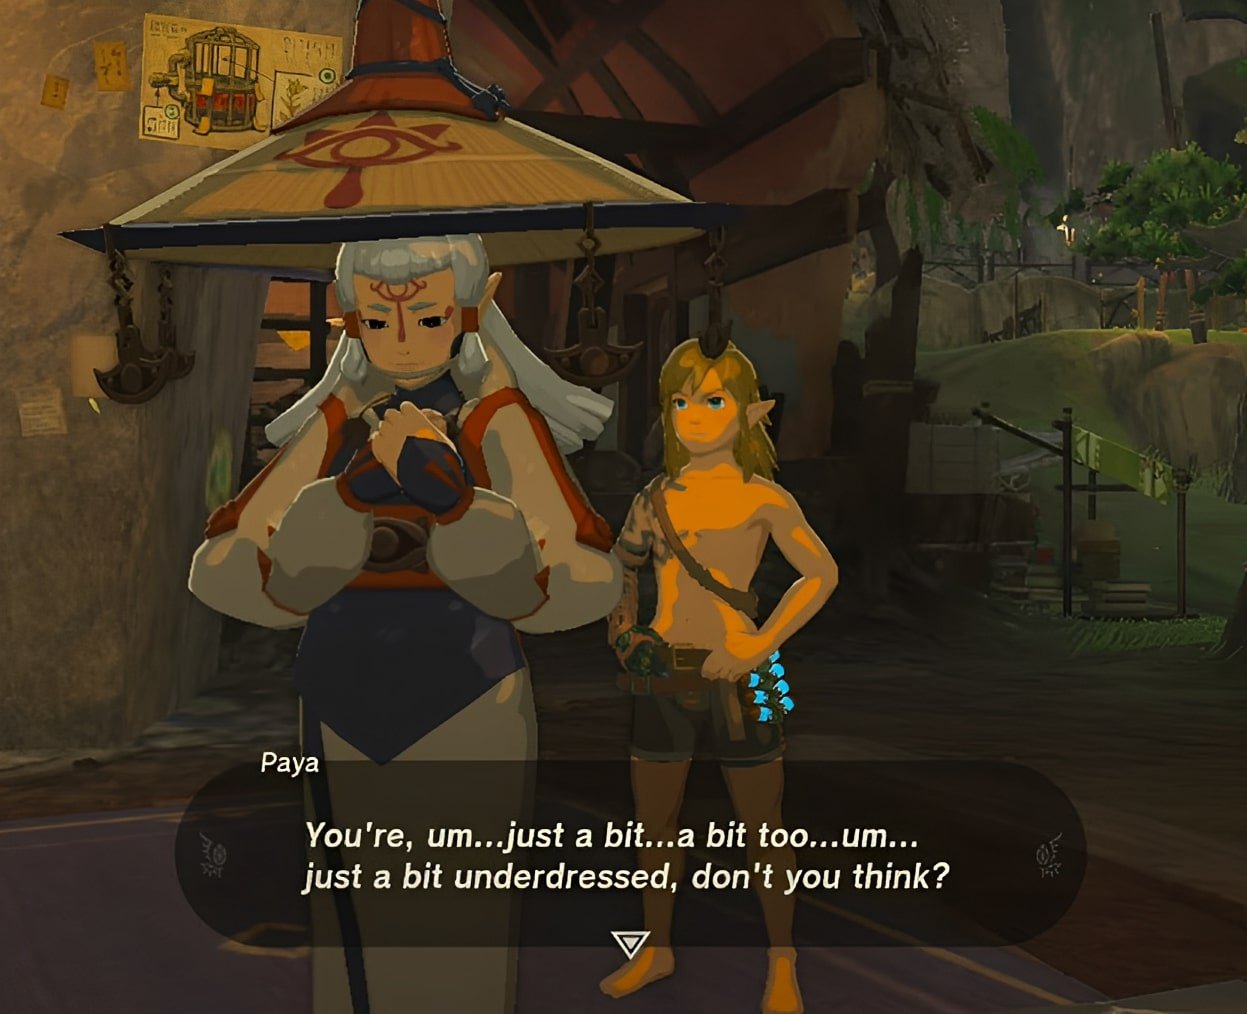 Paya Interacts With Naked Link